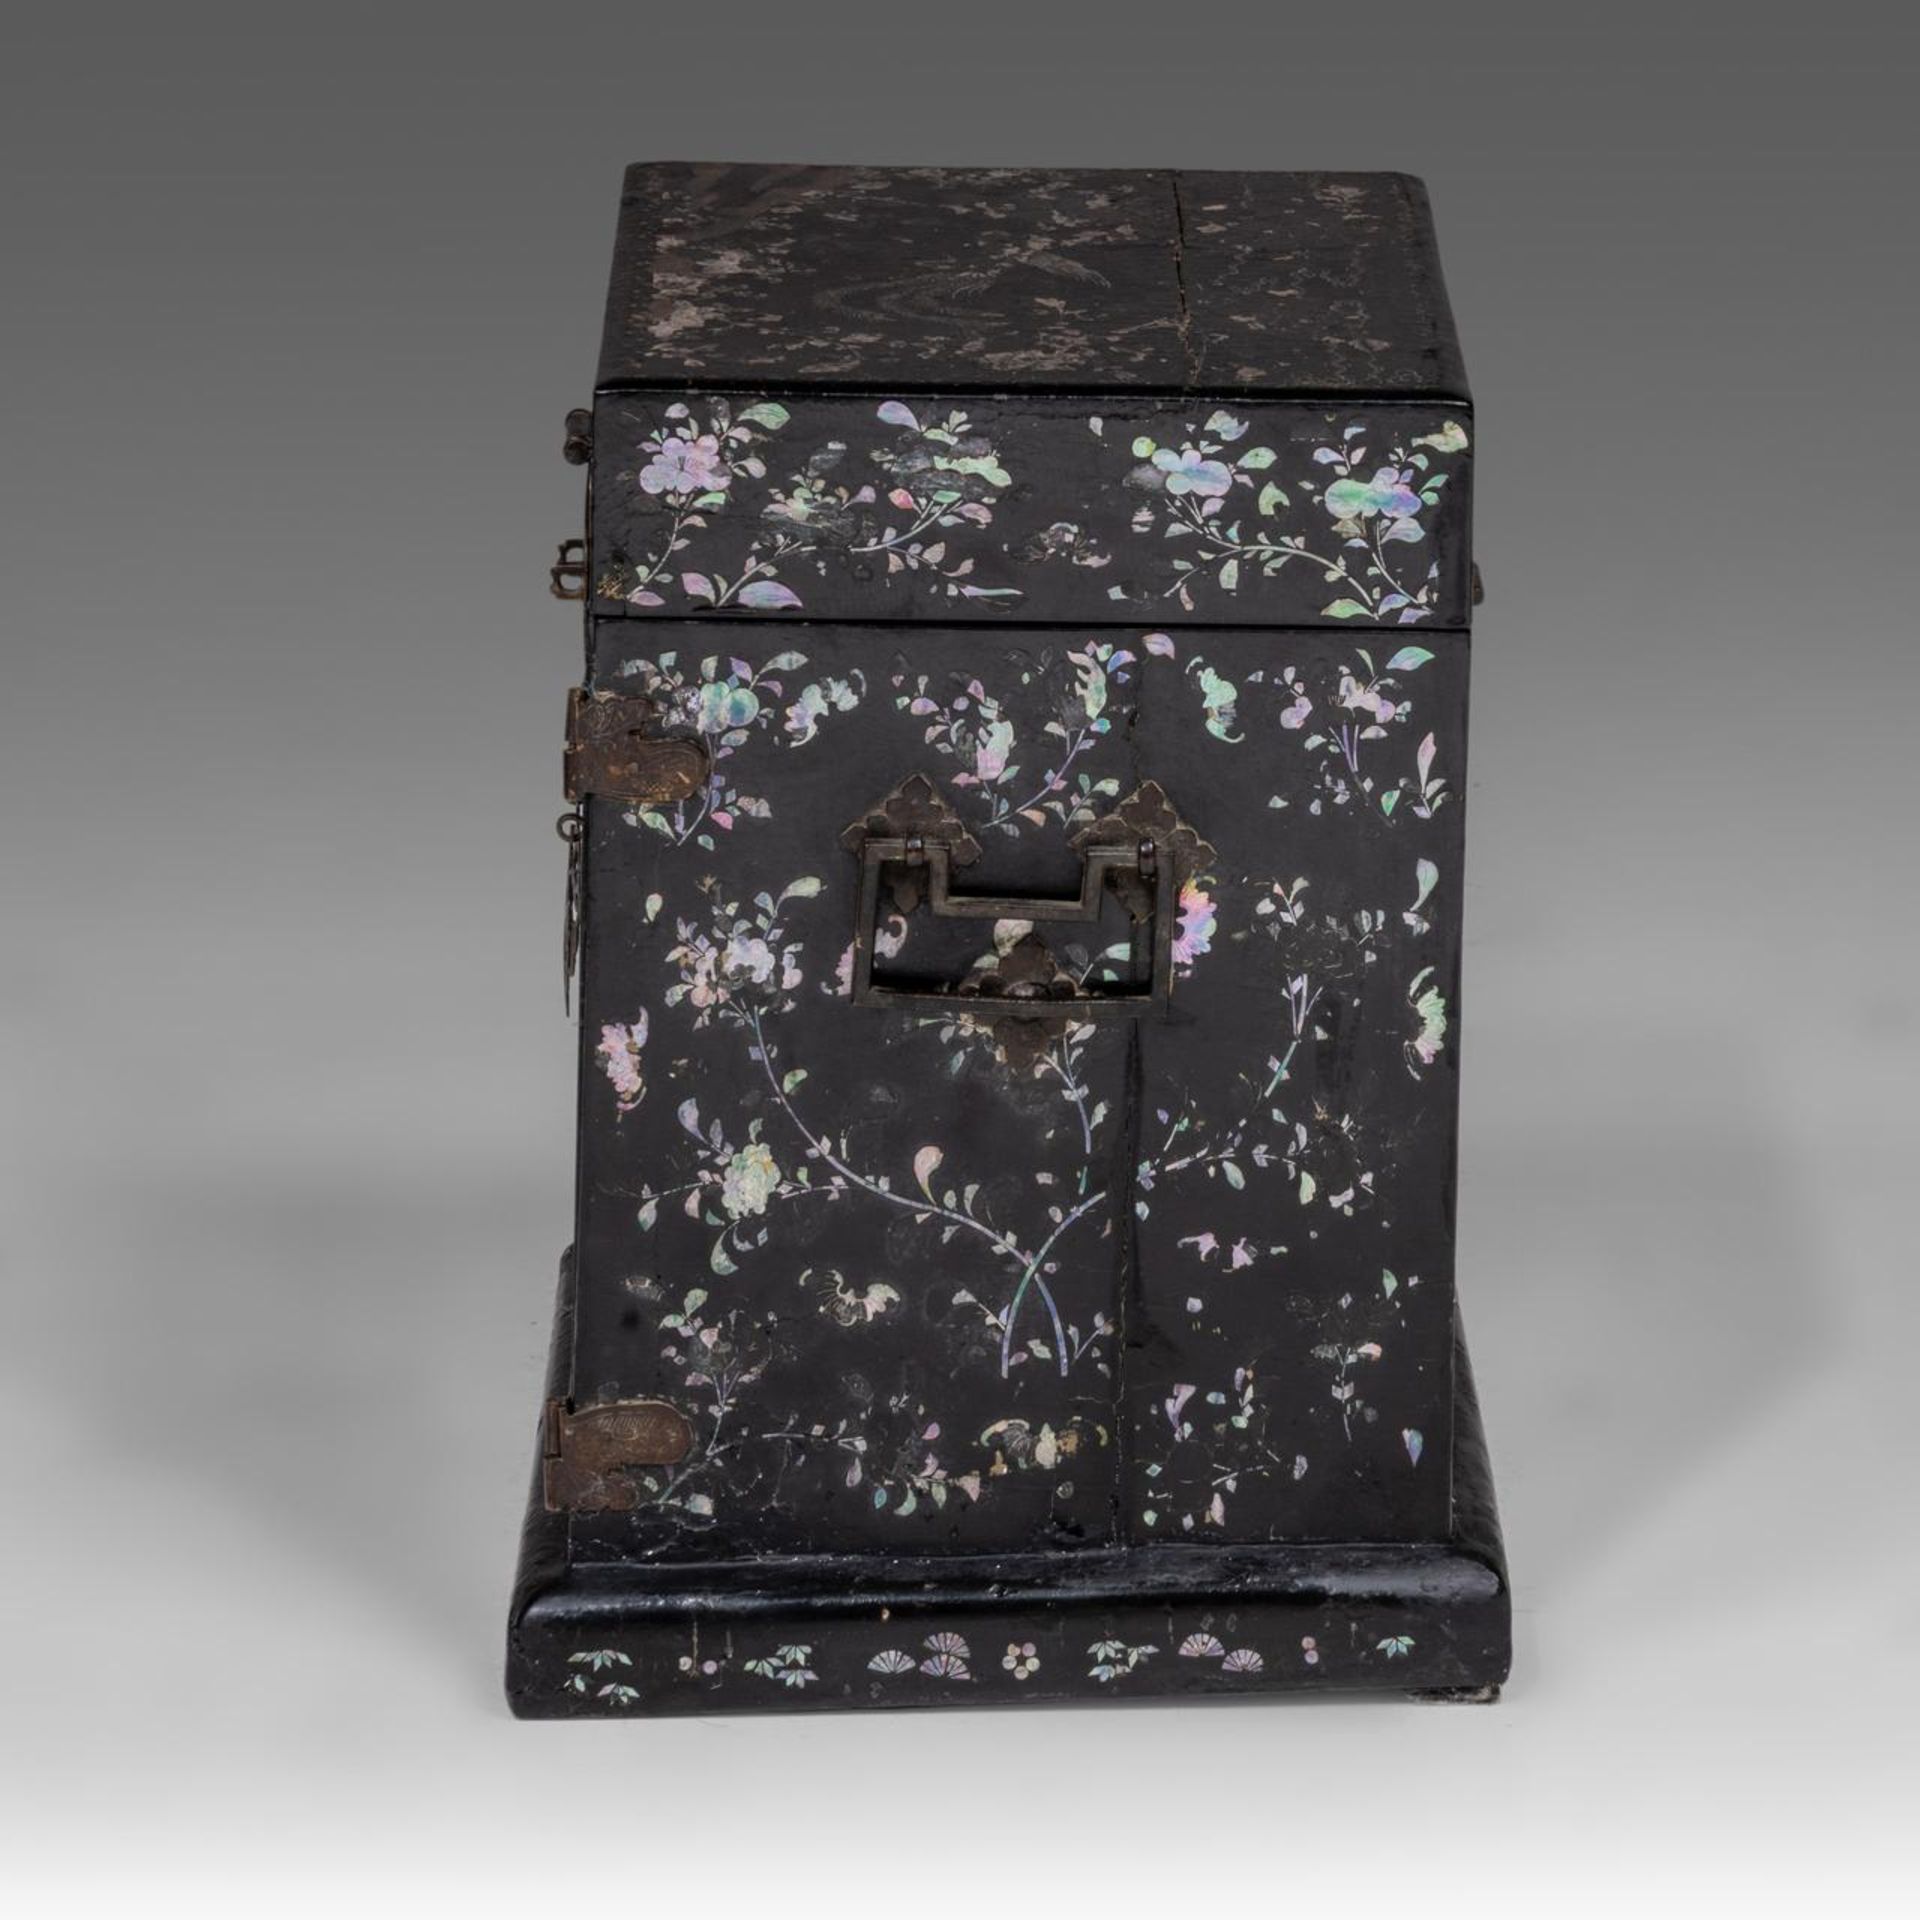 A Chinese lac burgaute travelling writing box or table cabinet, 17thC/18thC, H 31 - 28,5 x 21 cm - Image 5 of 7